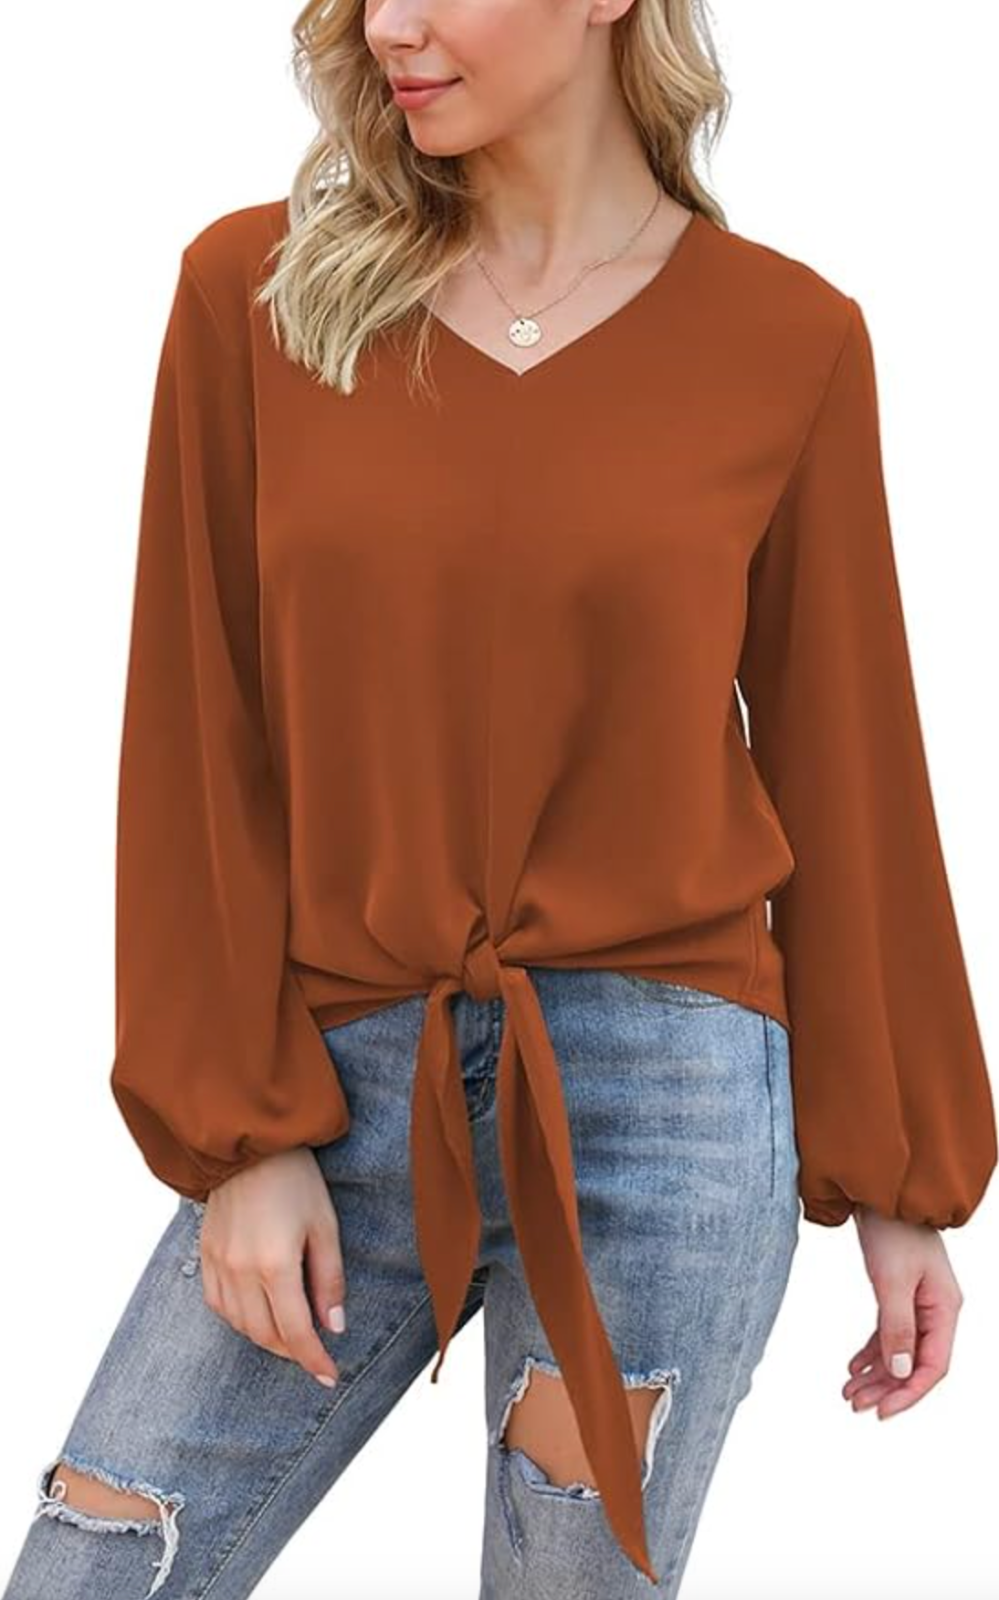 VIISHOW women's chiffon top with bow at the front